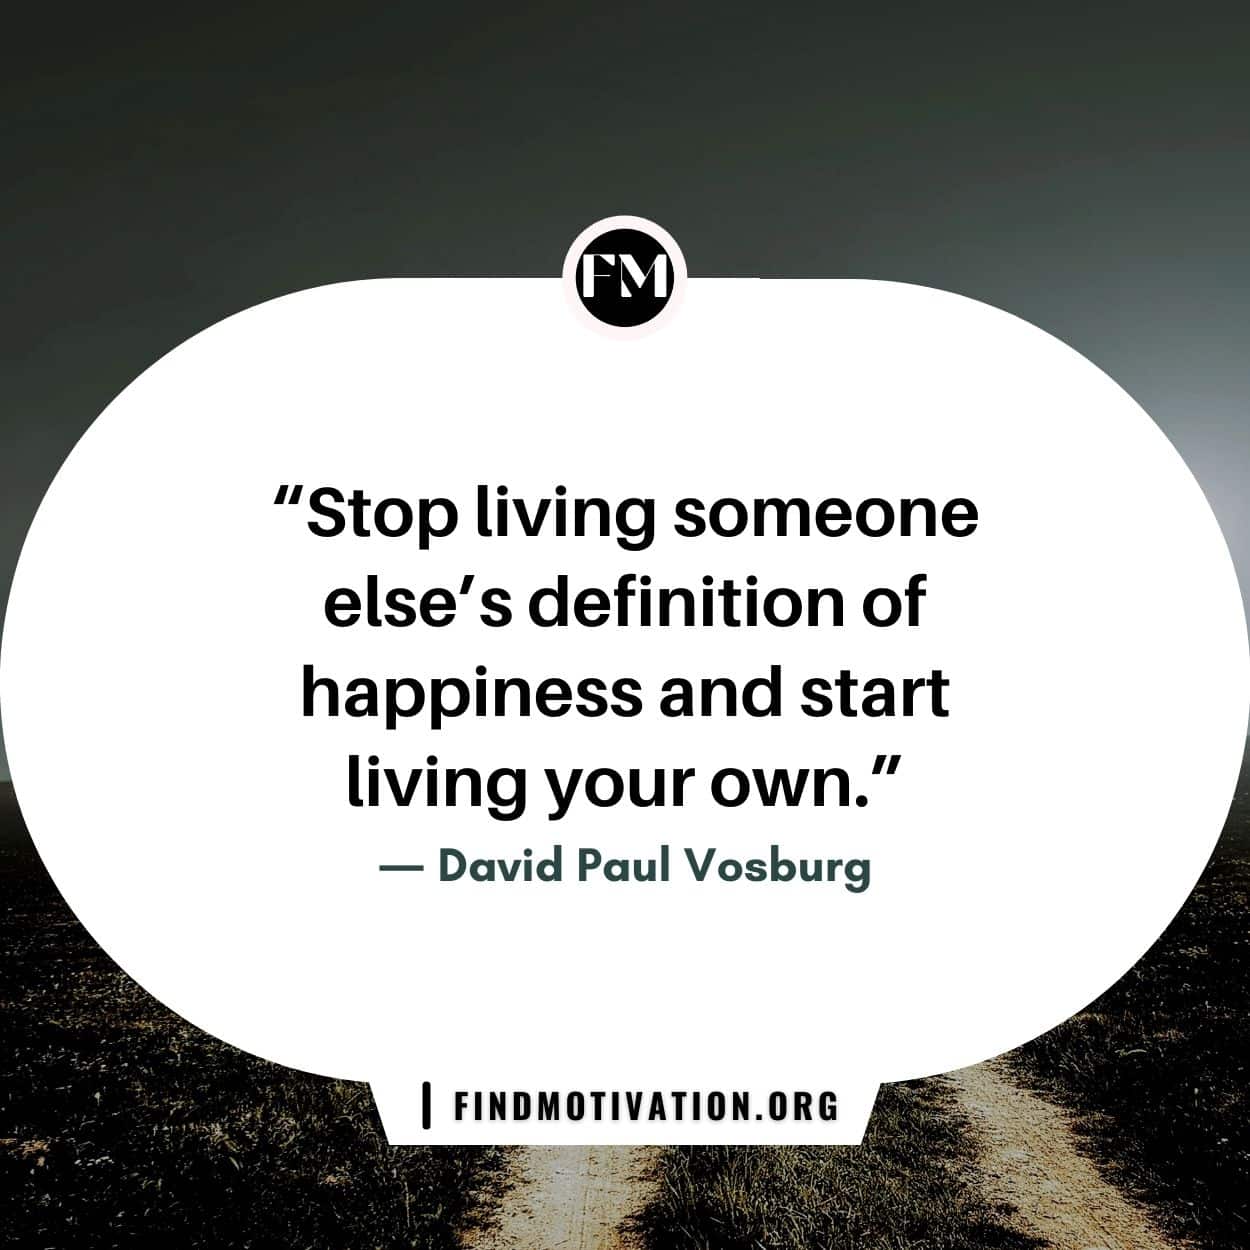 Inspiring find yourself quotes to find your own freedom